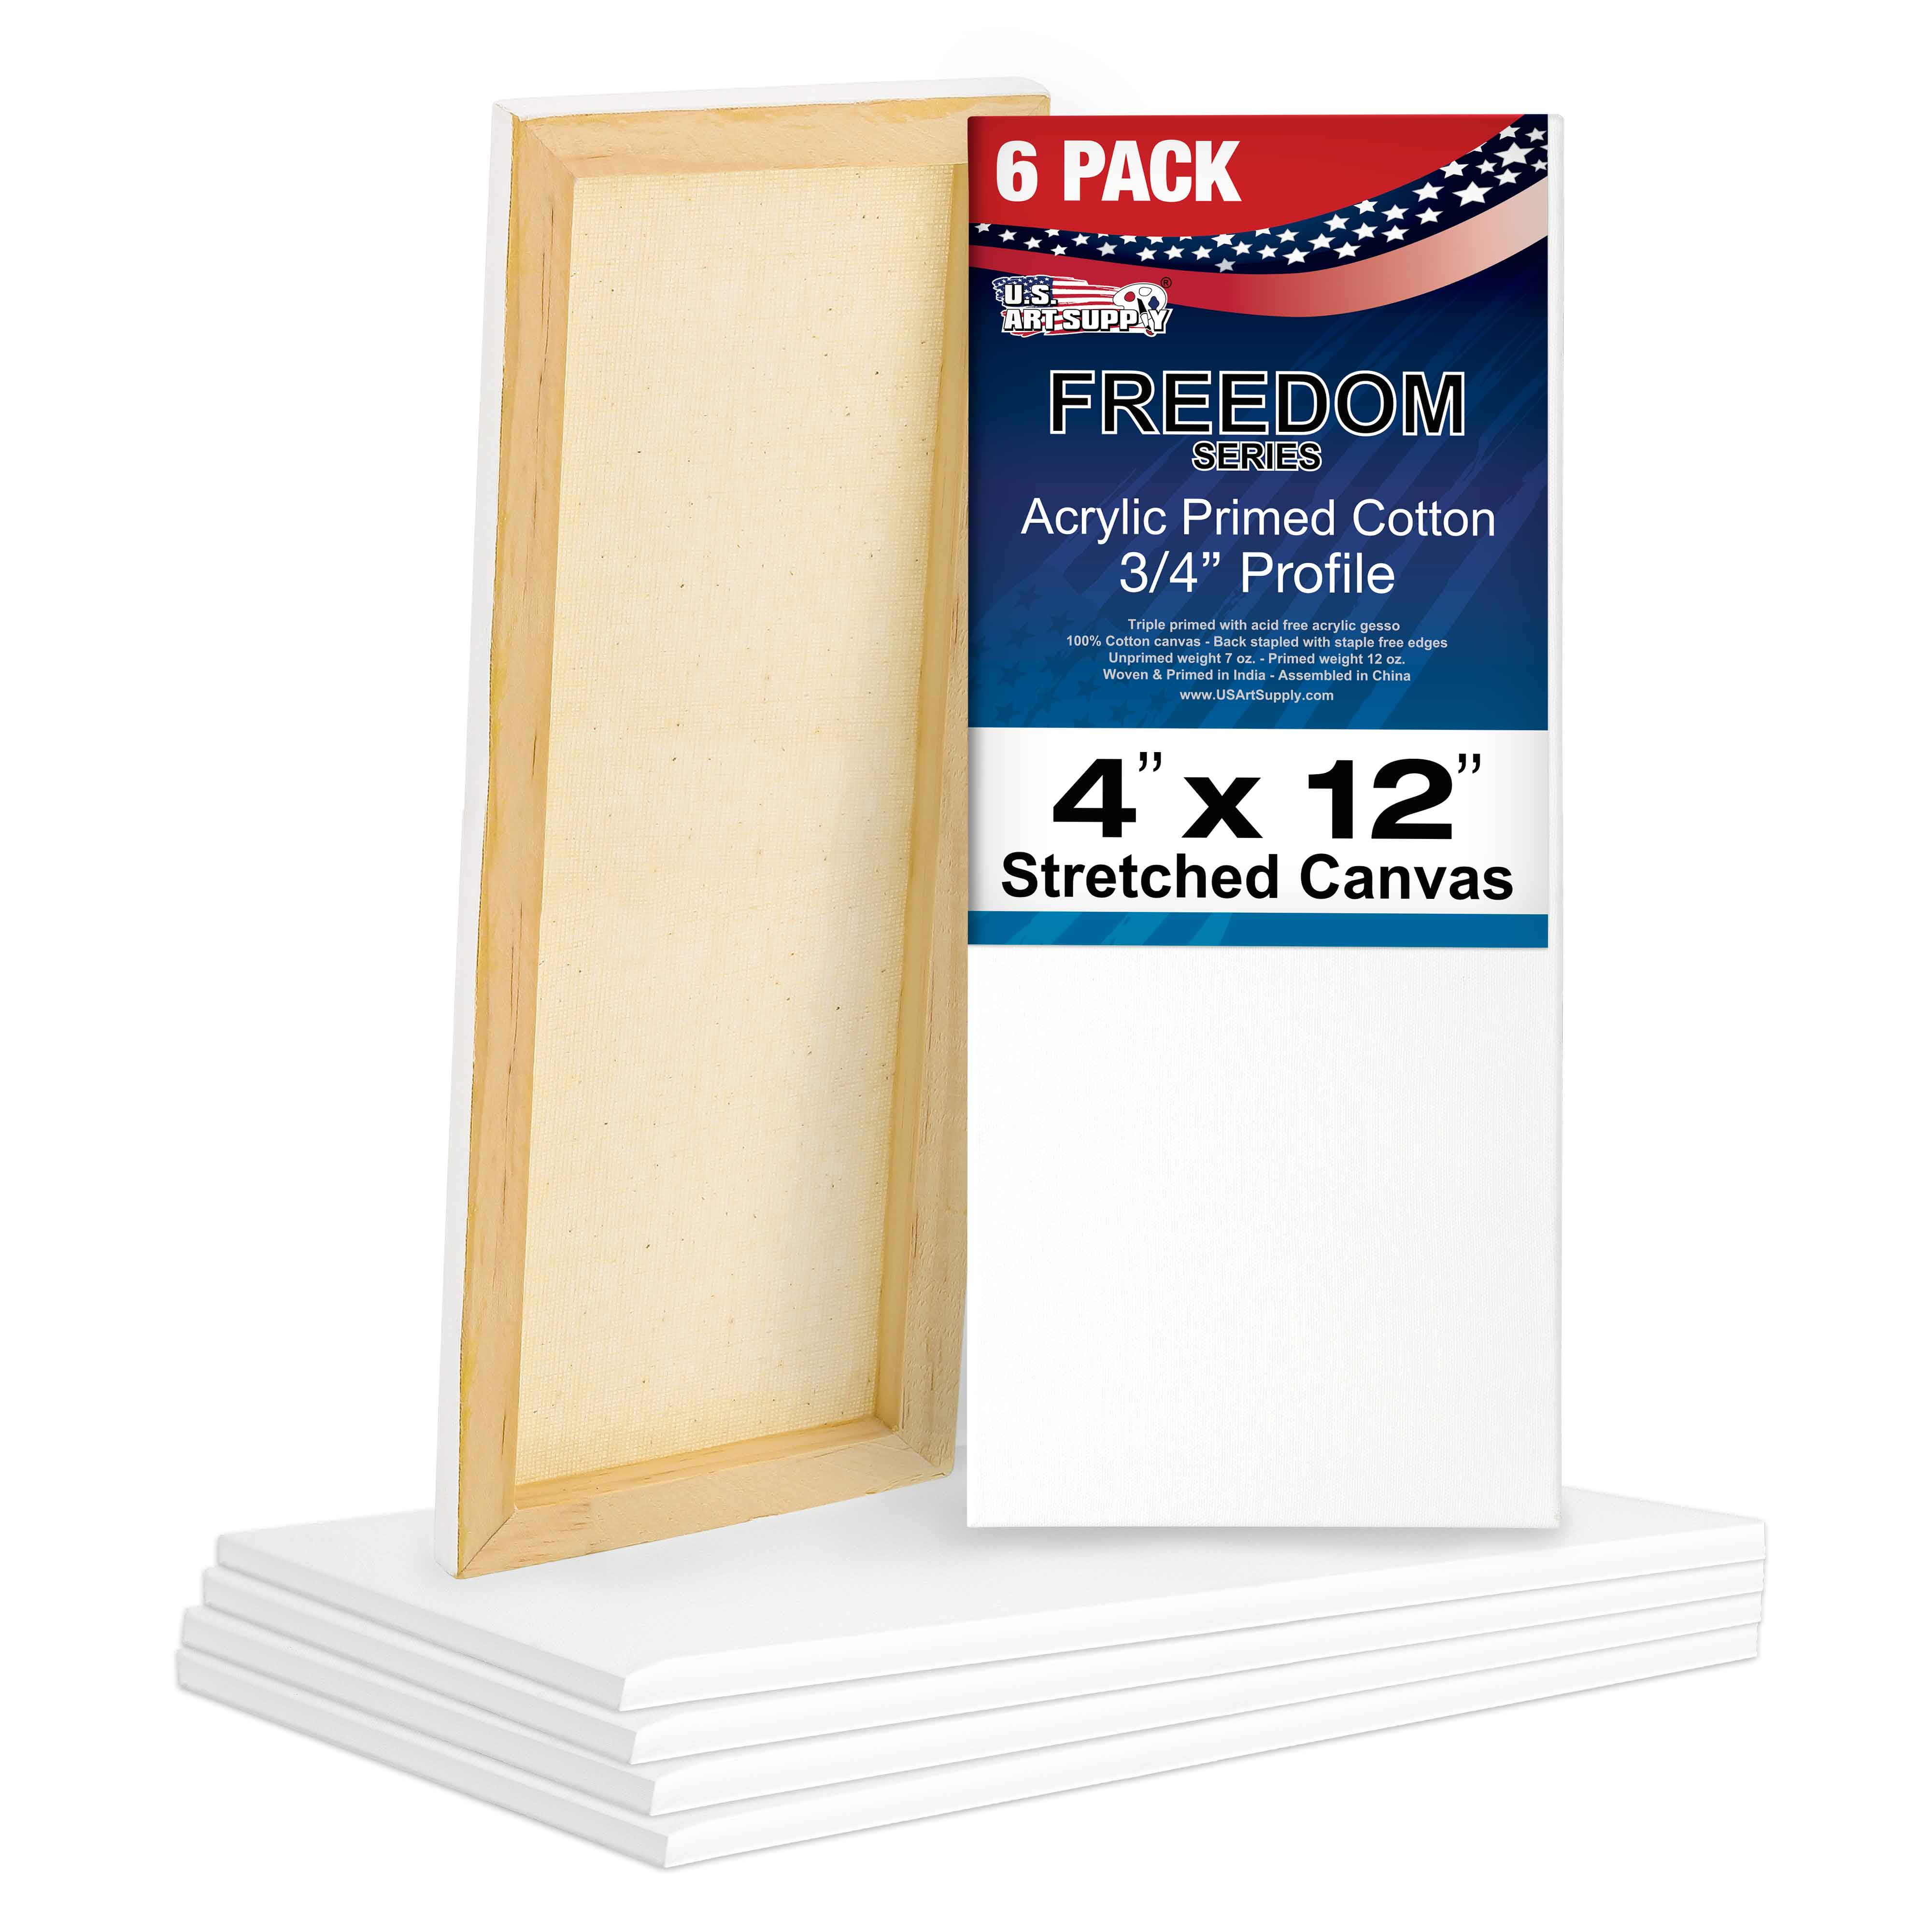 Stretched Canvases for Painting 5 Pack 18x24 inch, 100% Cotton 12.3 oz Triple Primed Painting Canvas, 3/4 Profile Acid-Free Large Paint Canvas